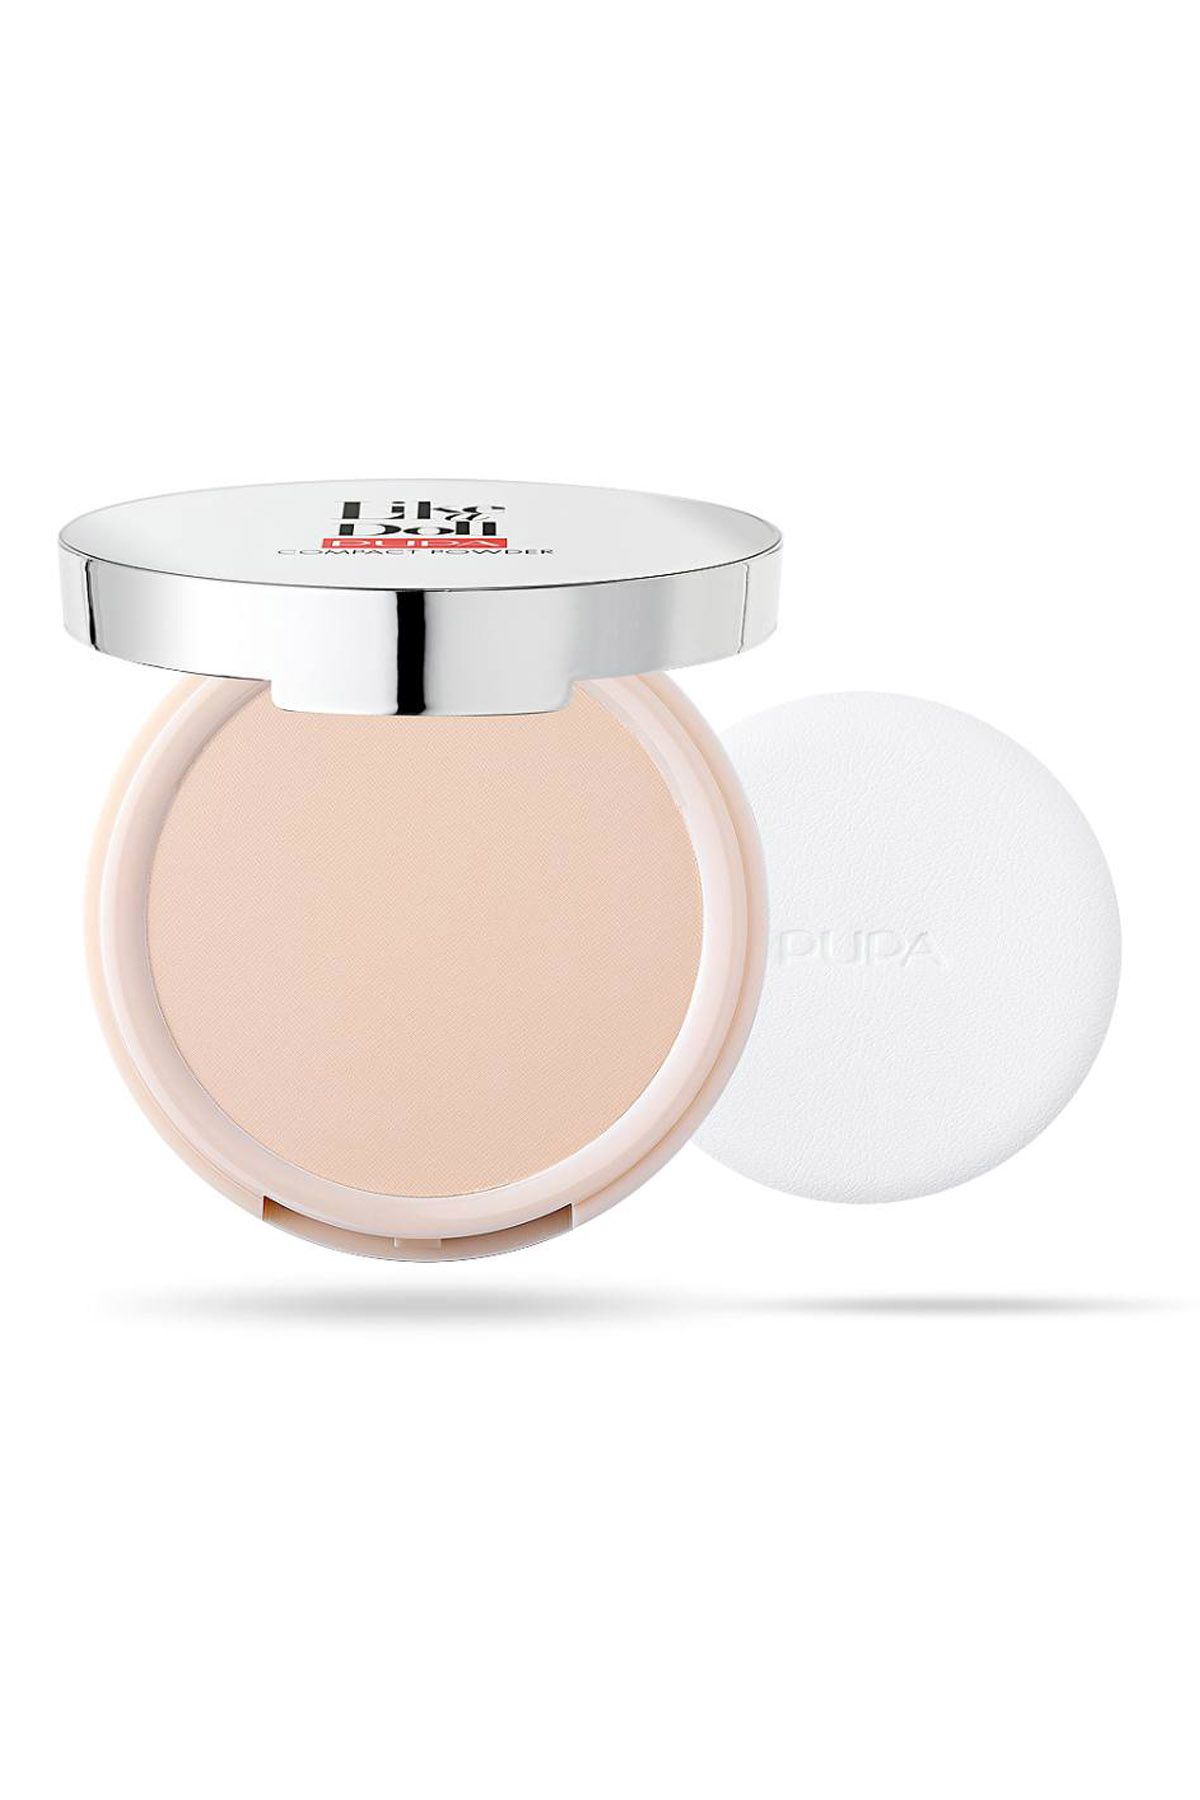 Pupa Like A Doll - Nude Skin Comp Pwdr - Sublime Nude - 002